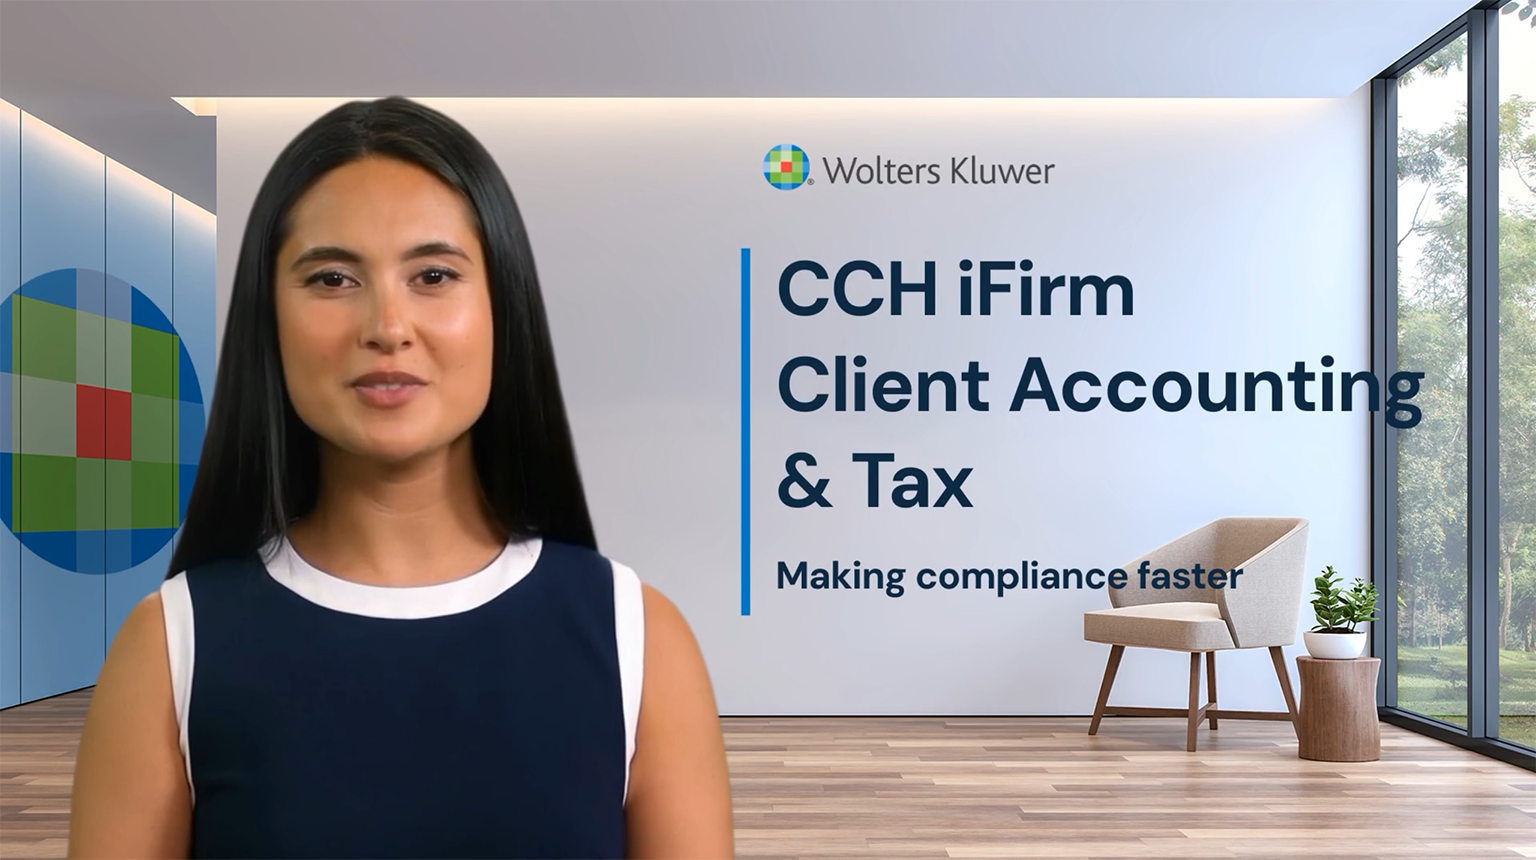 Screenshot of CCH iFirm Client Accounting & Tax video